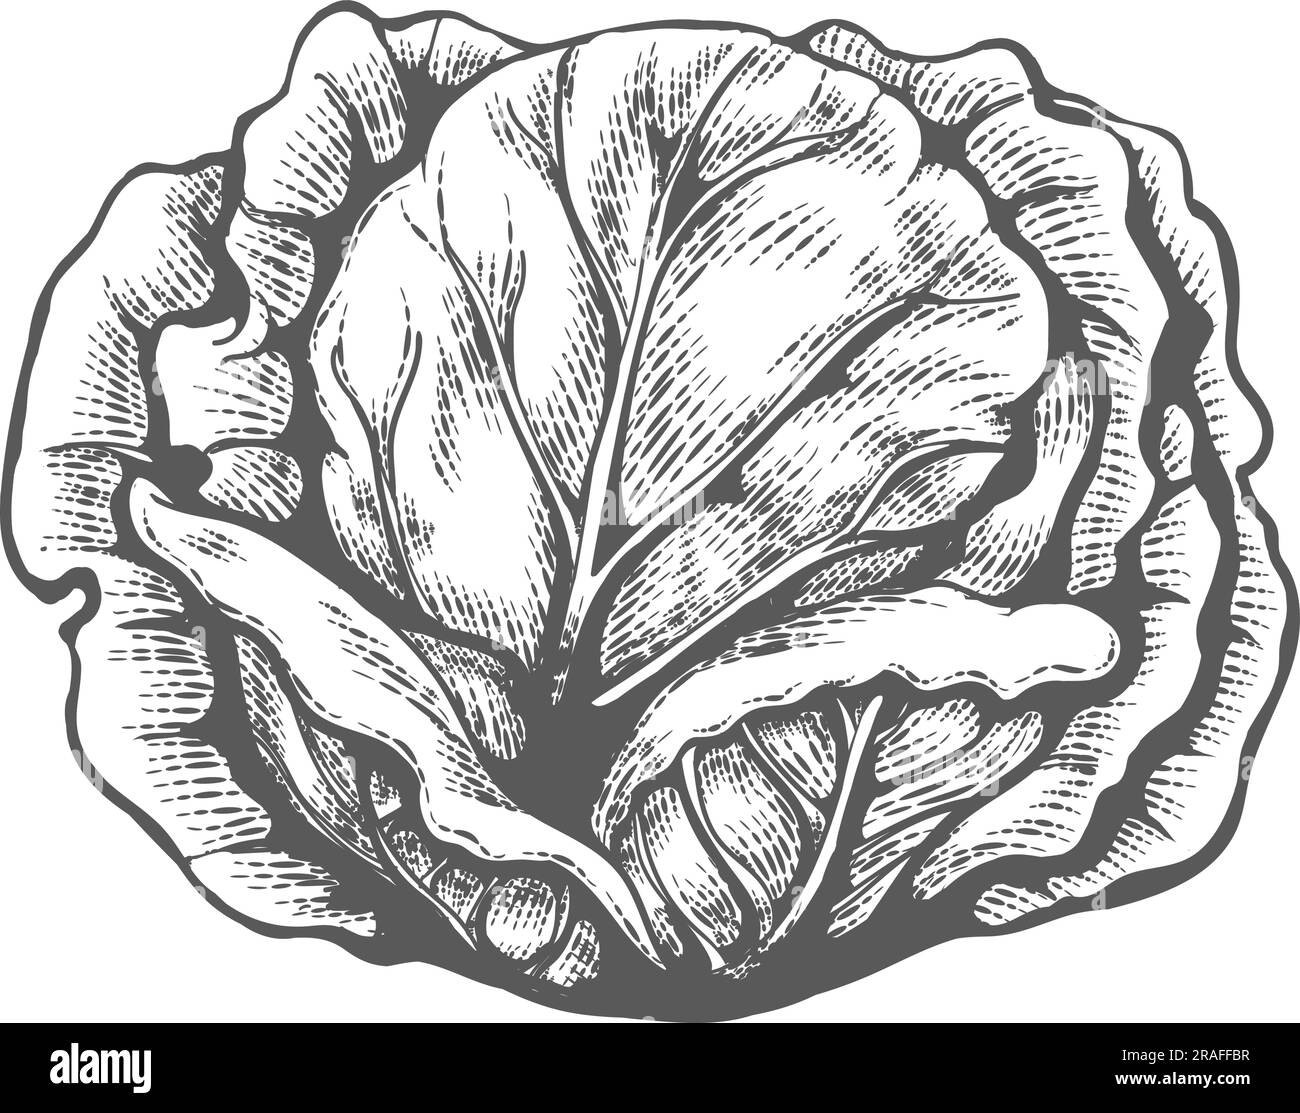 White cabbage engraved sketch Stock Vector